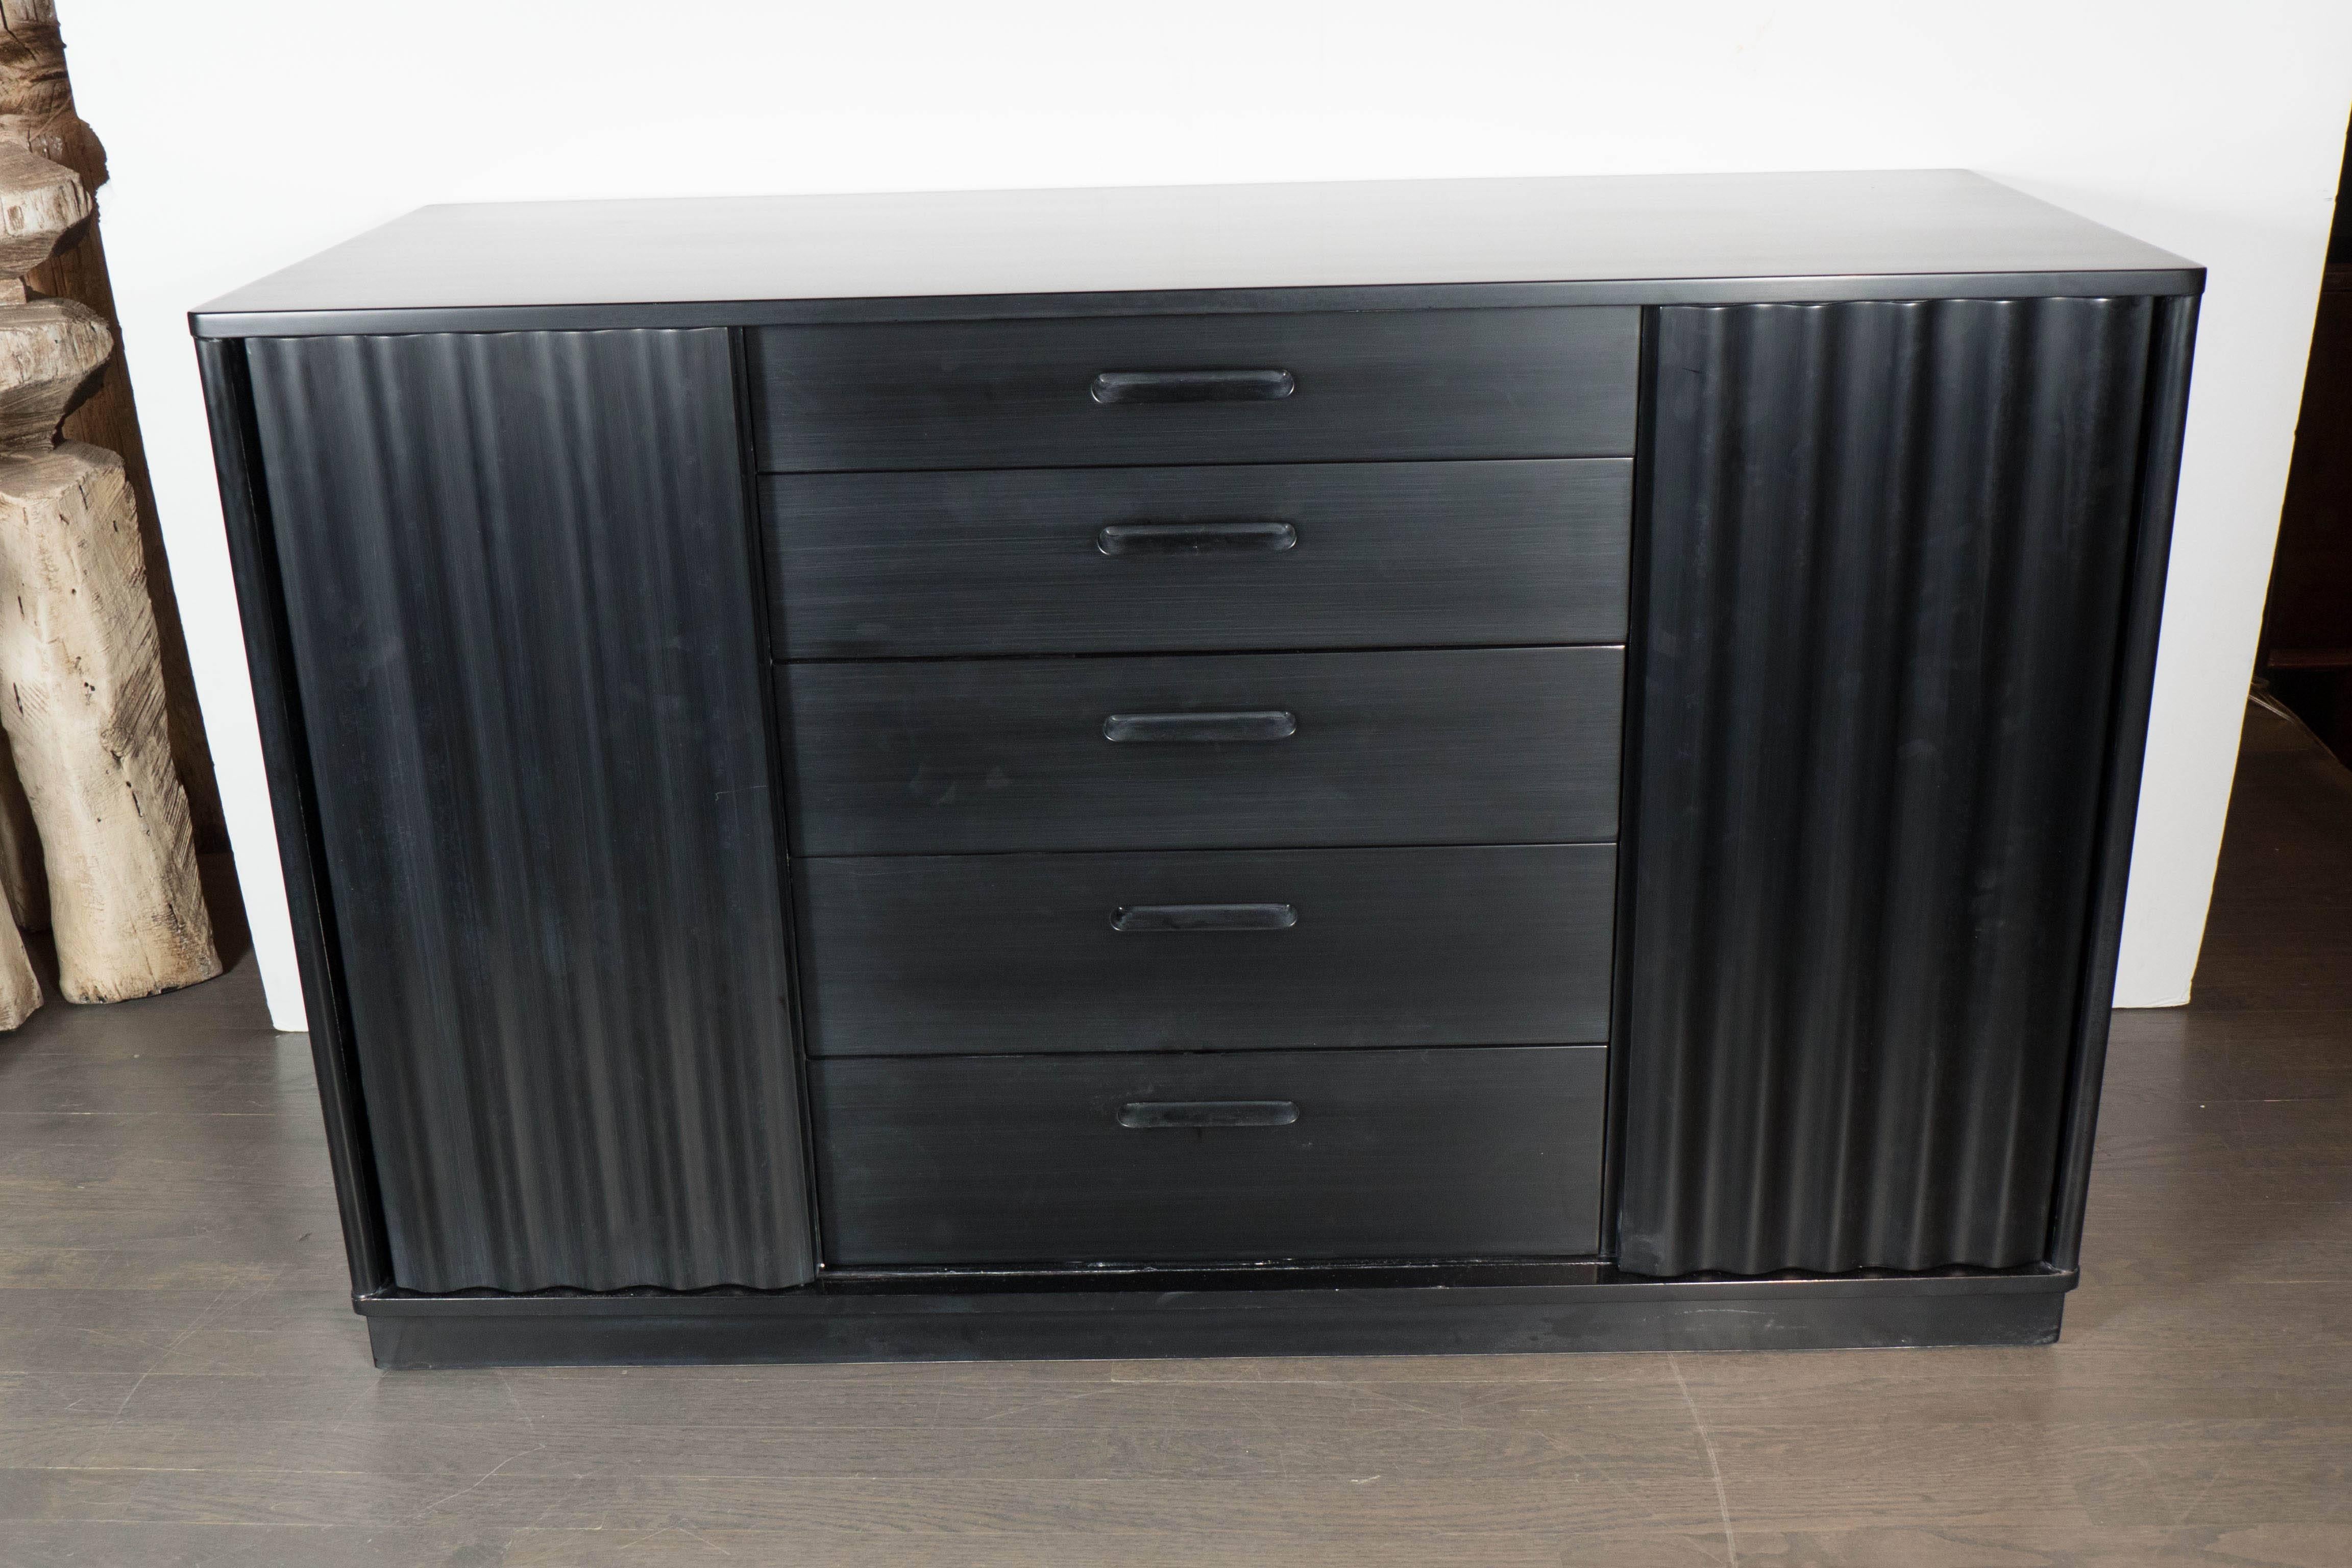 Gorgeous Mid-Century Modernist chest or credenza in ebonized walnut by Edward Wormley for Dunbar features five drawers centrally positioned between sliding cabinet doors with a fluted design, the cabinets have adjustable interior shelving. A